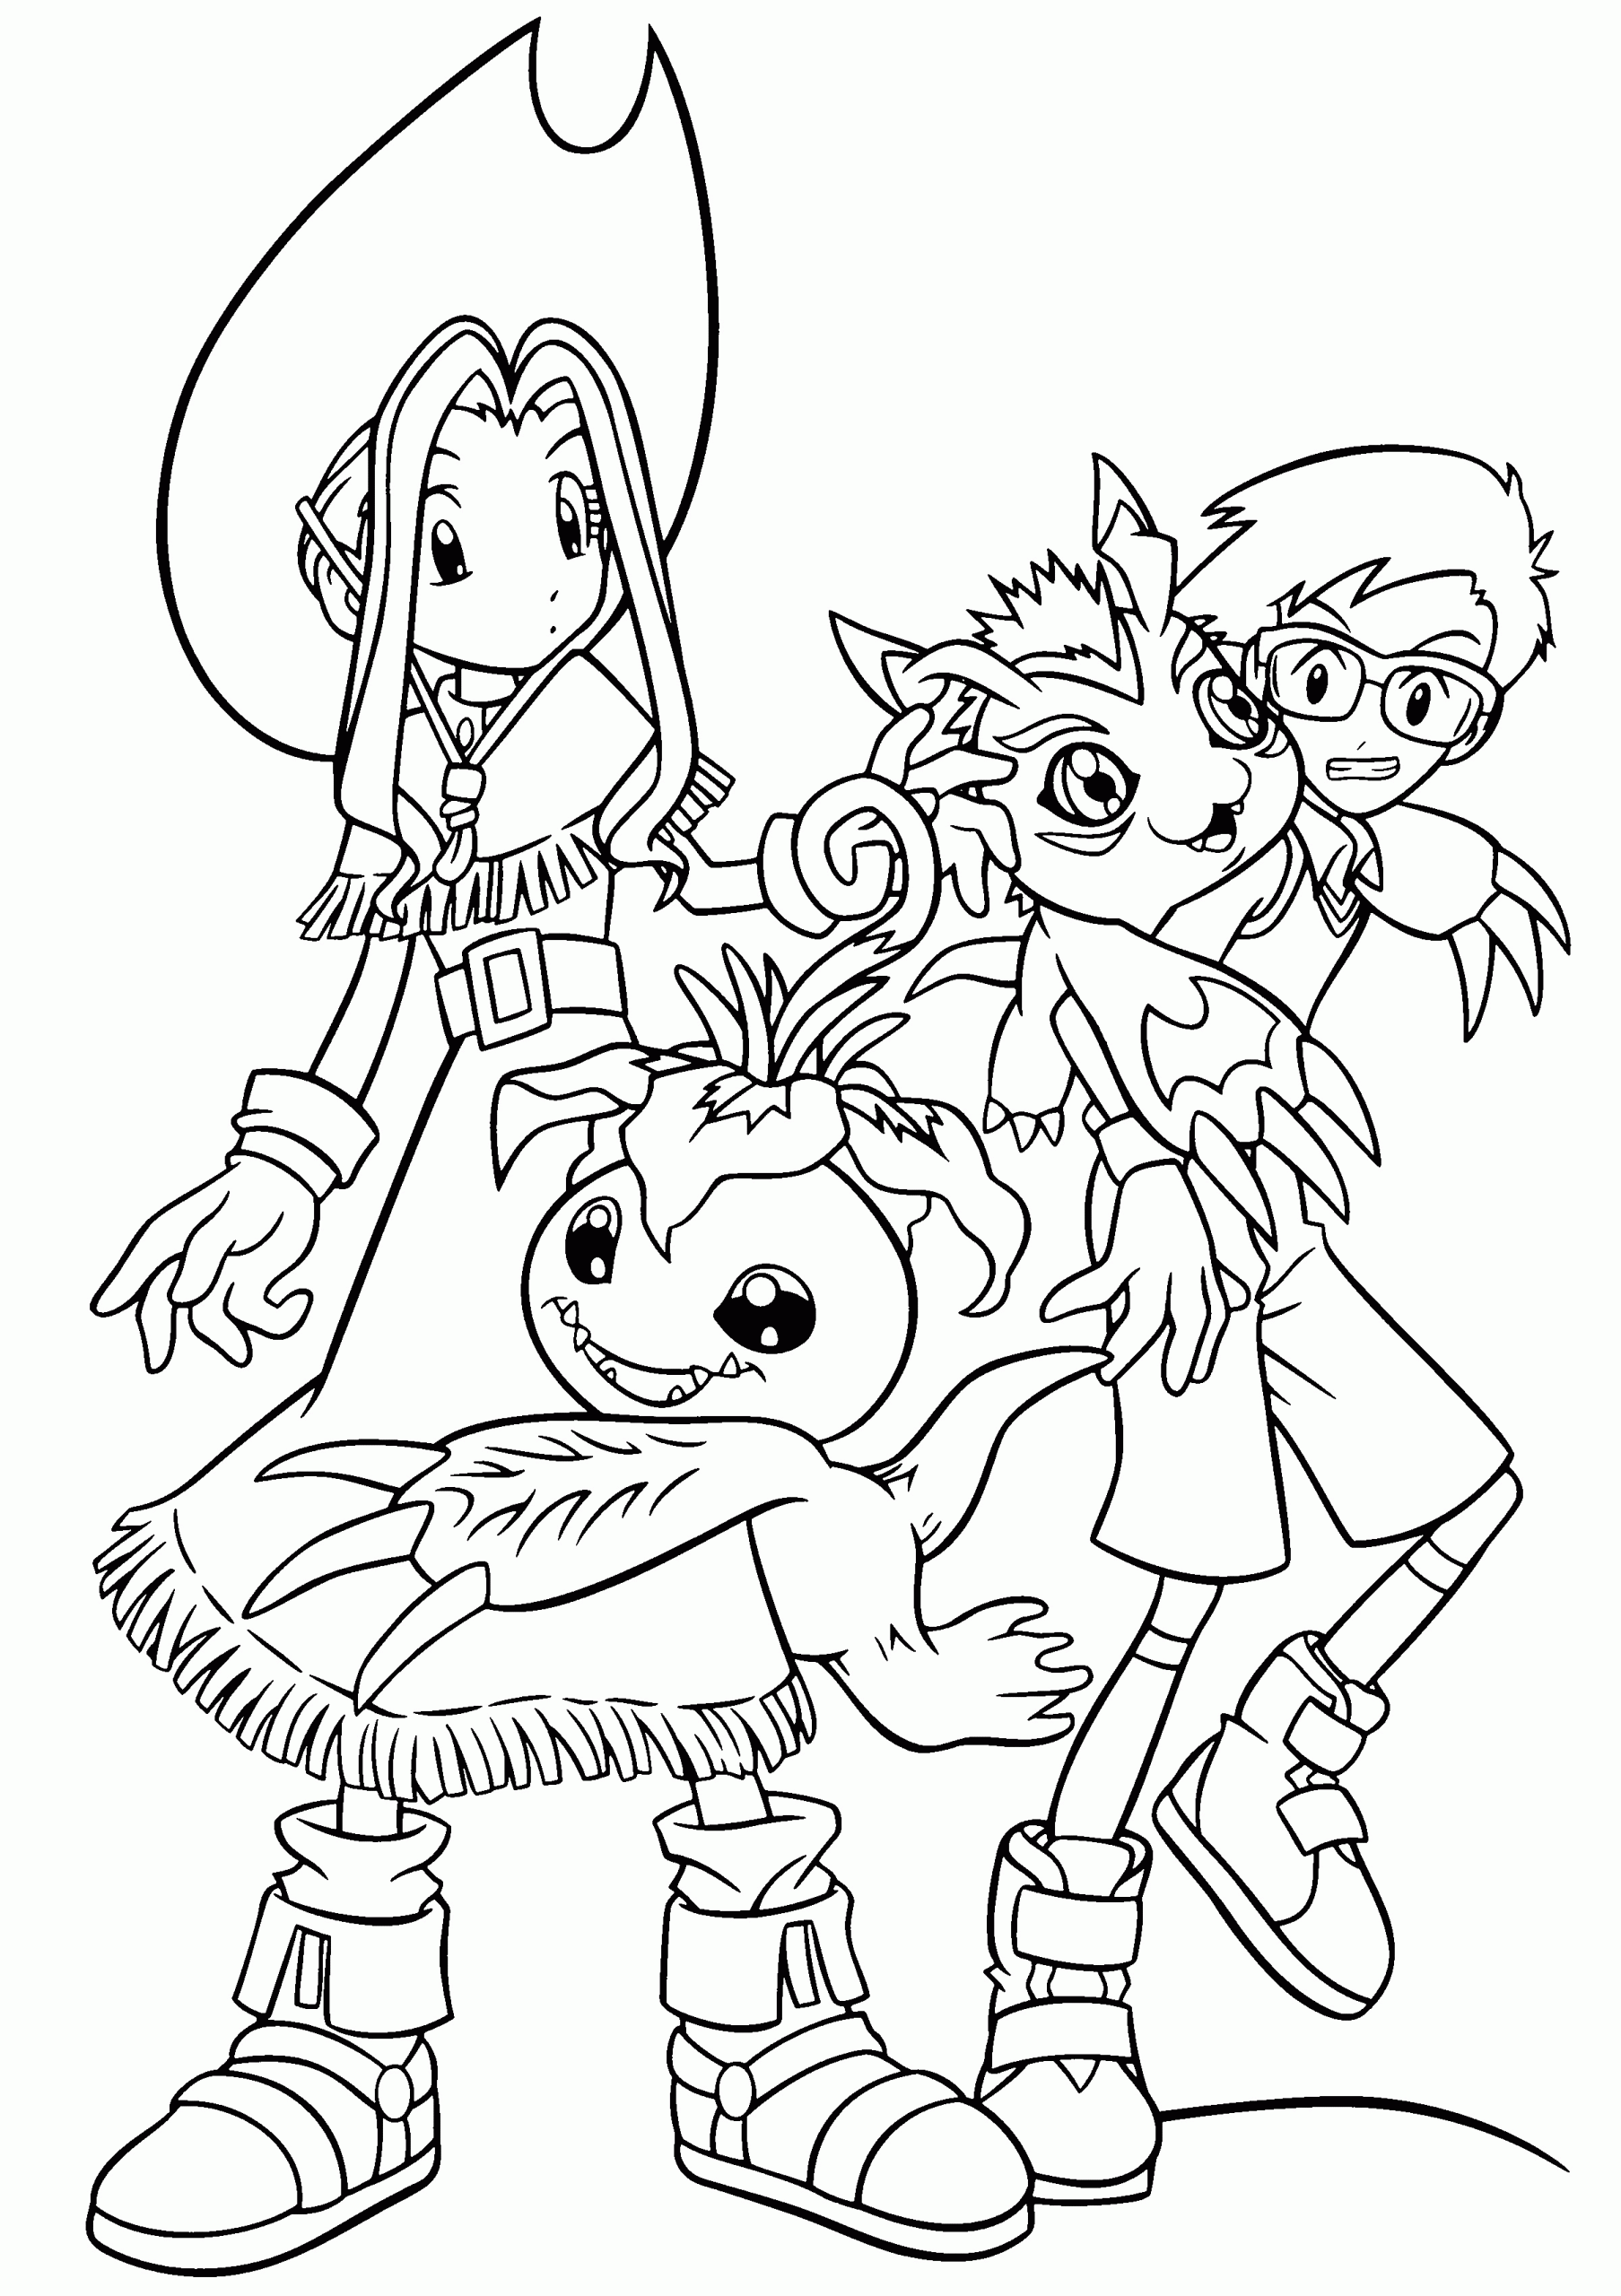 Kids Coloring Book Pages
 Free Printable Digimon Coloring Pages For Kids